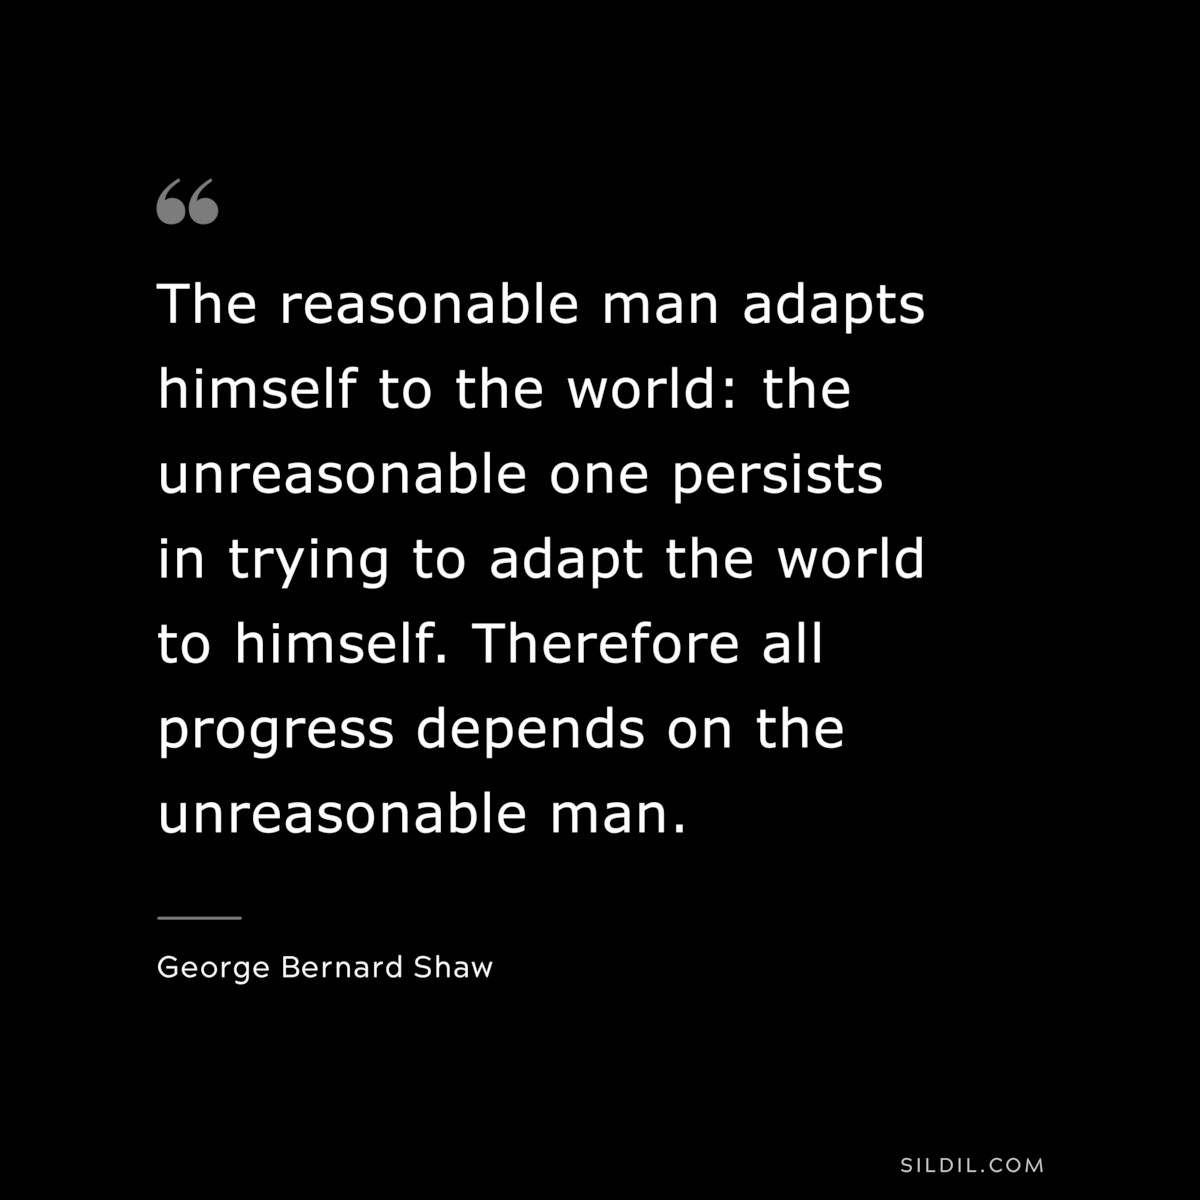 The reasonable man adapts himself to the world: the unreasonable one persists in trying to adapt the world to himself. Therefore all progress depends on the unreasonable man. ― George Bernard Shaw